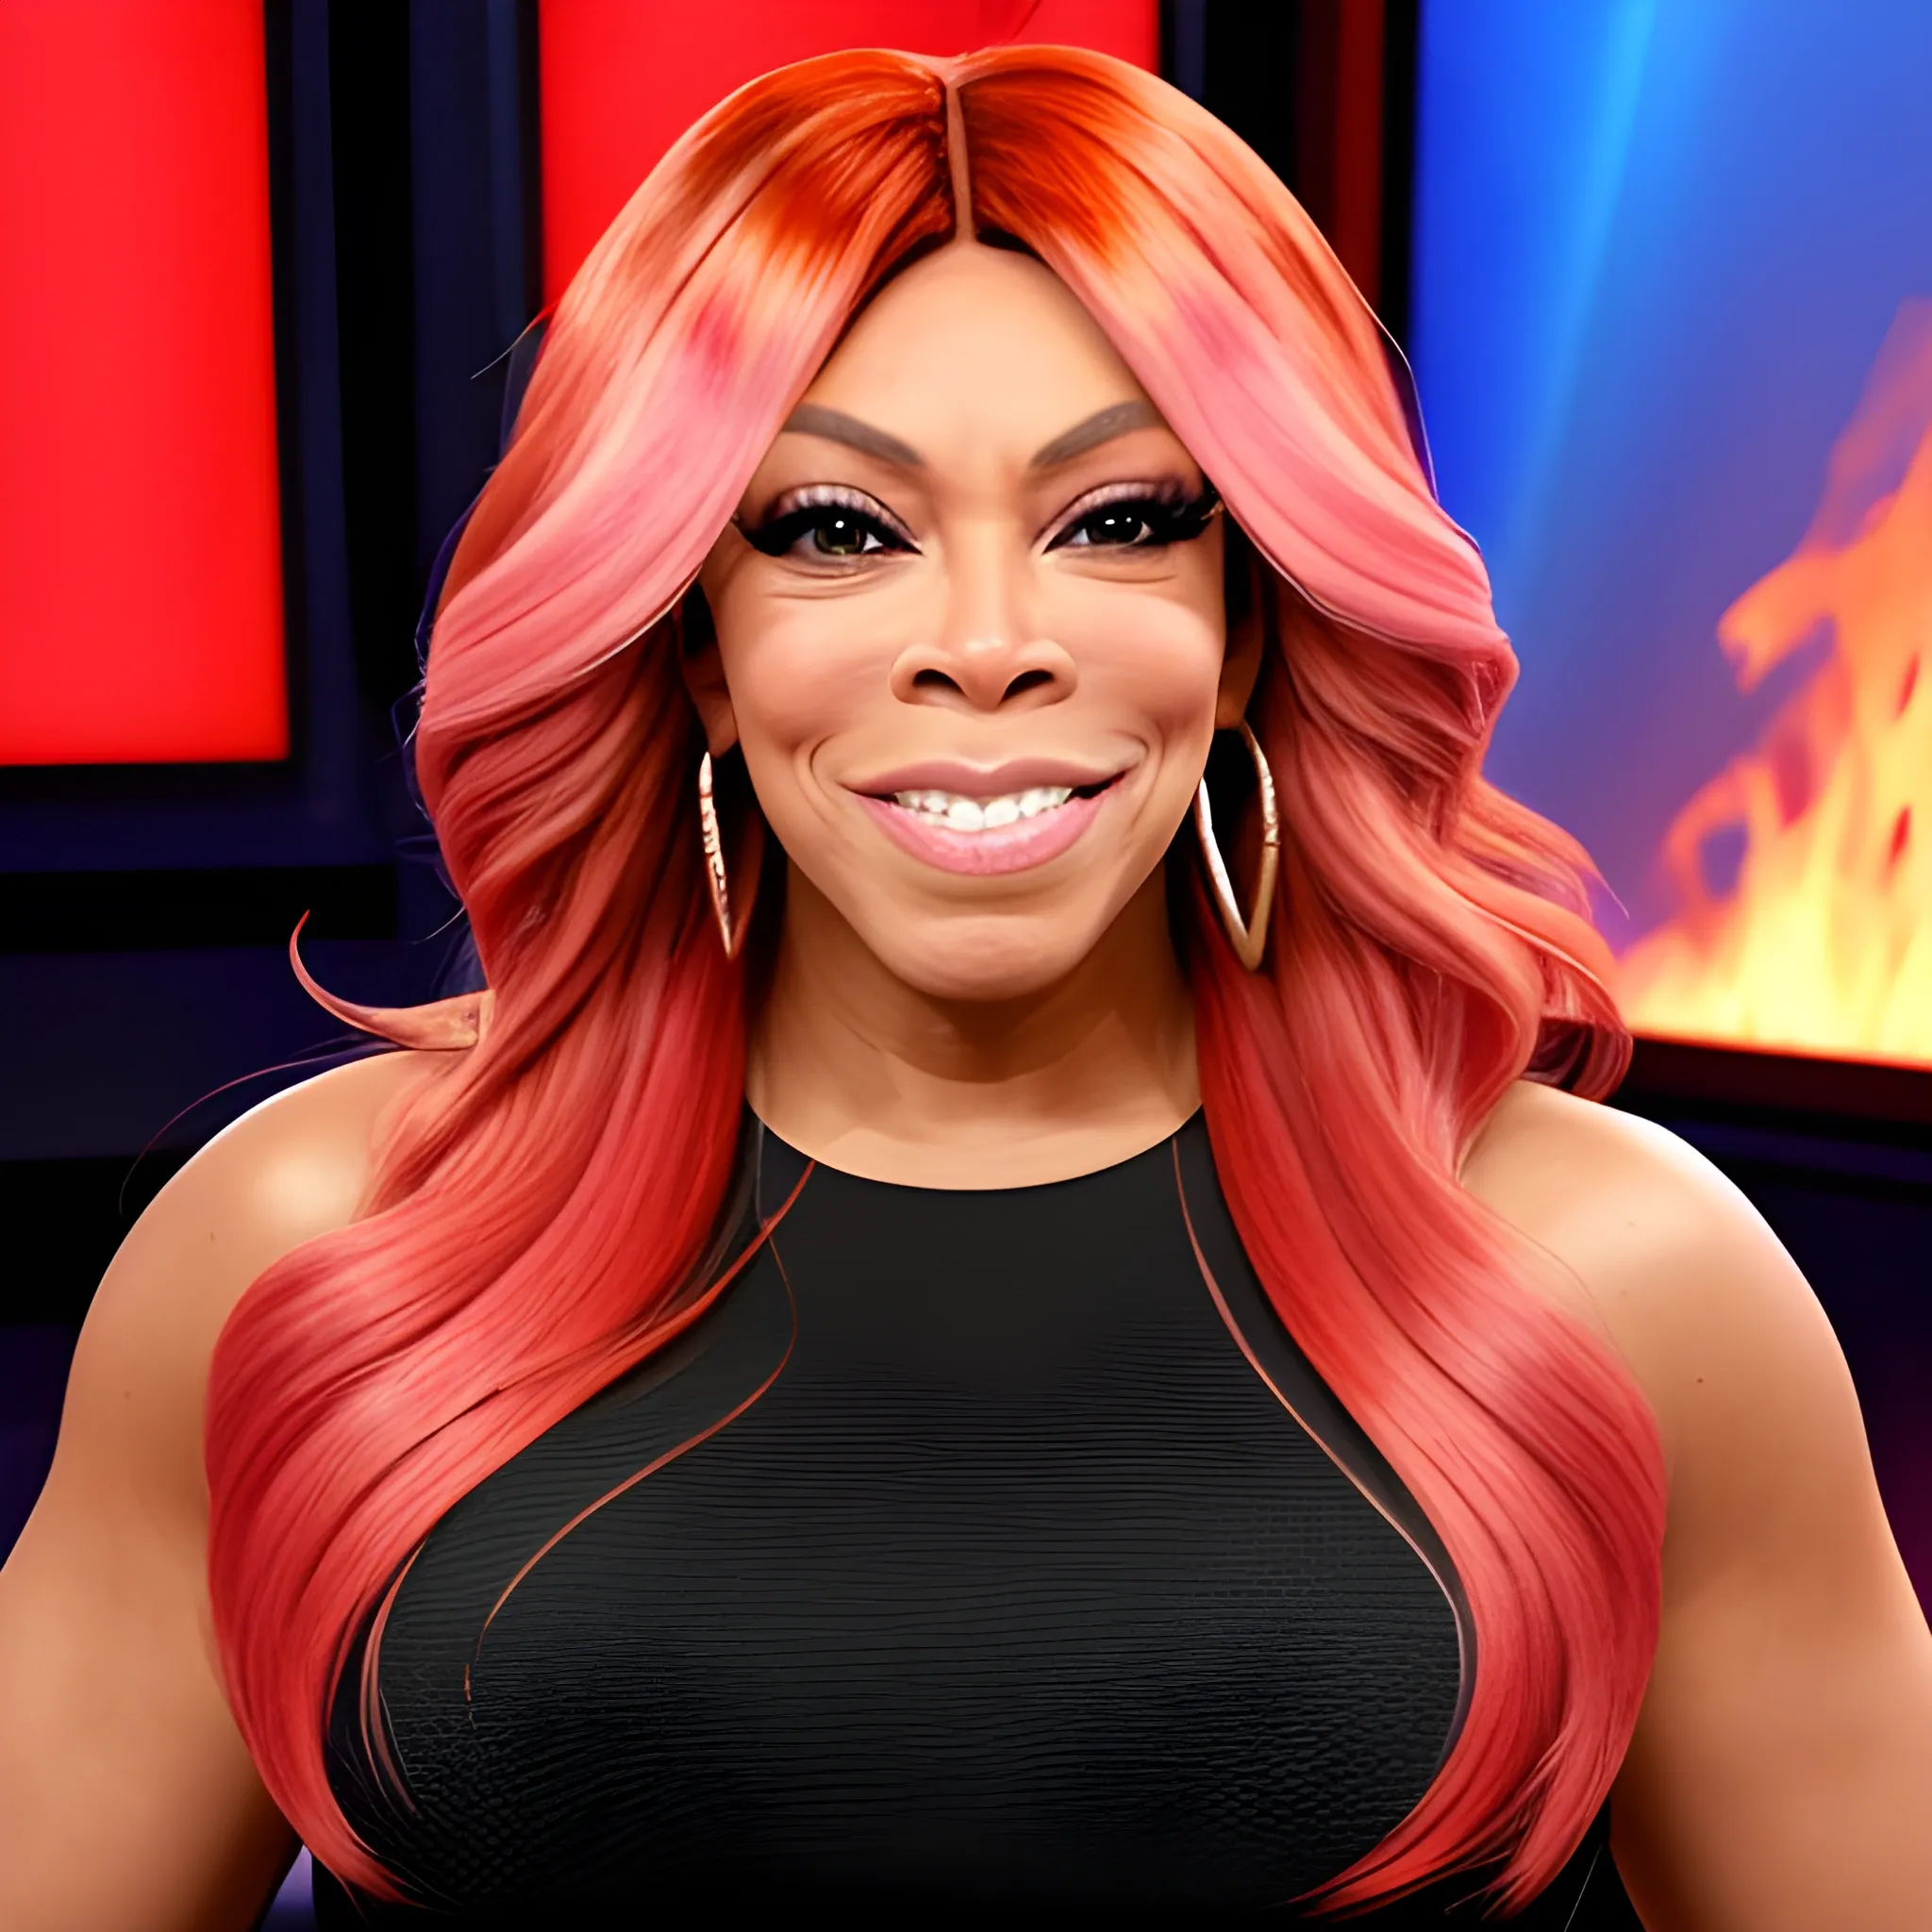 wendy williams doing hot topics as her hair catches fire, 3d